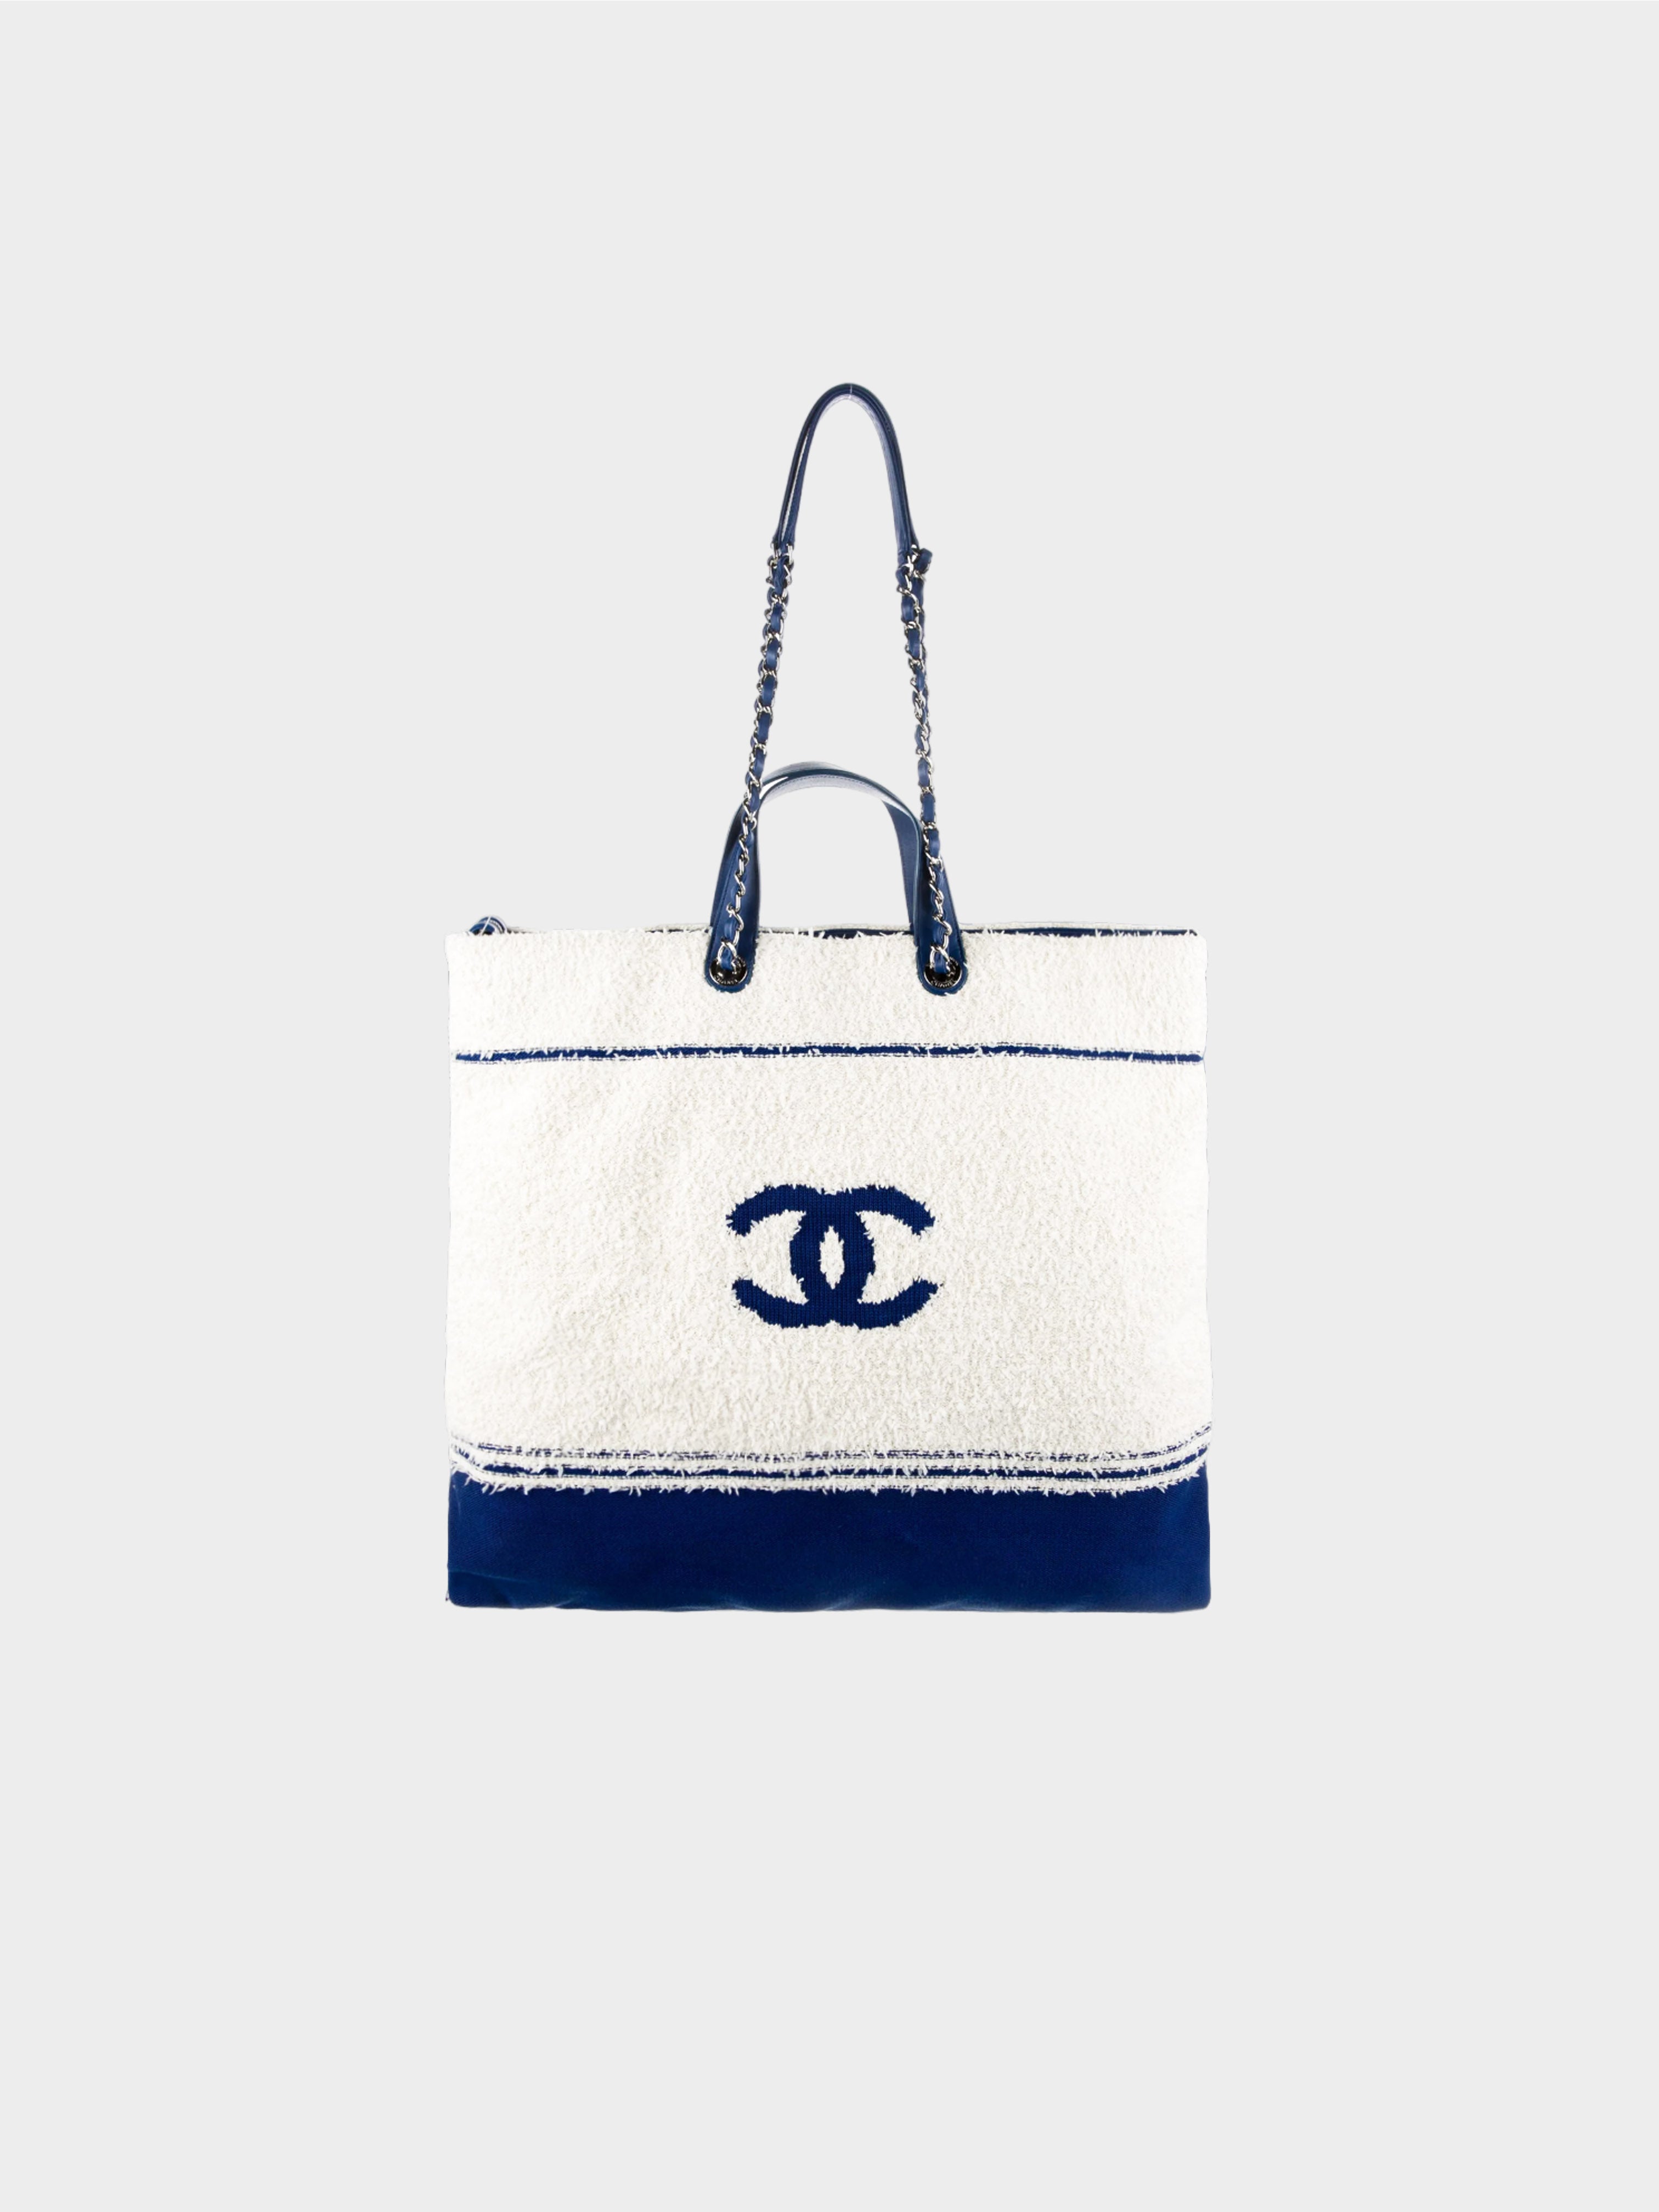 Chanel 2019 Venise Biarritz Large Shopping Tote